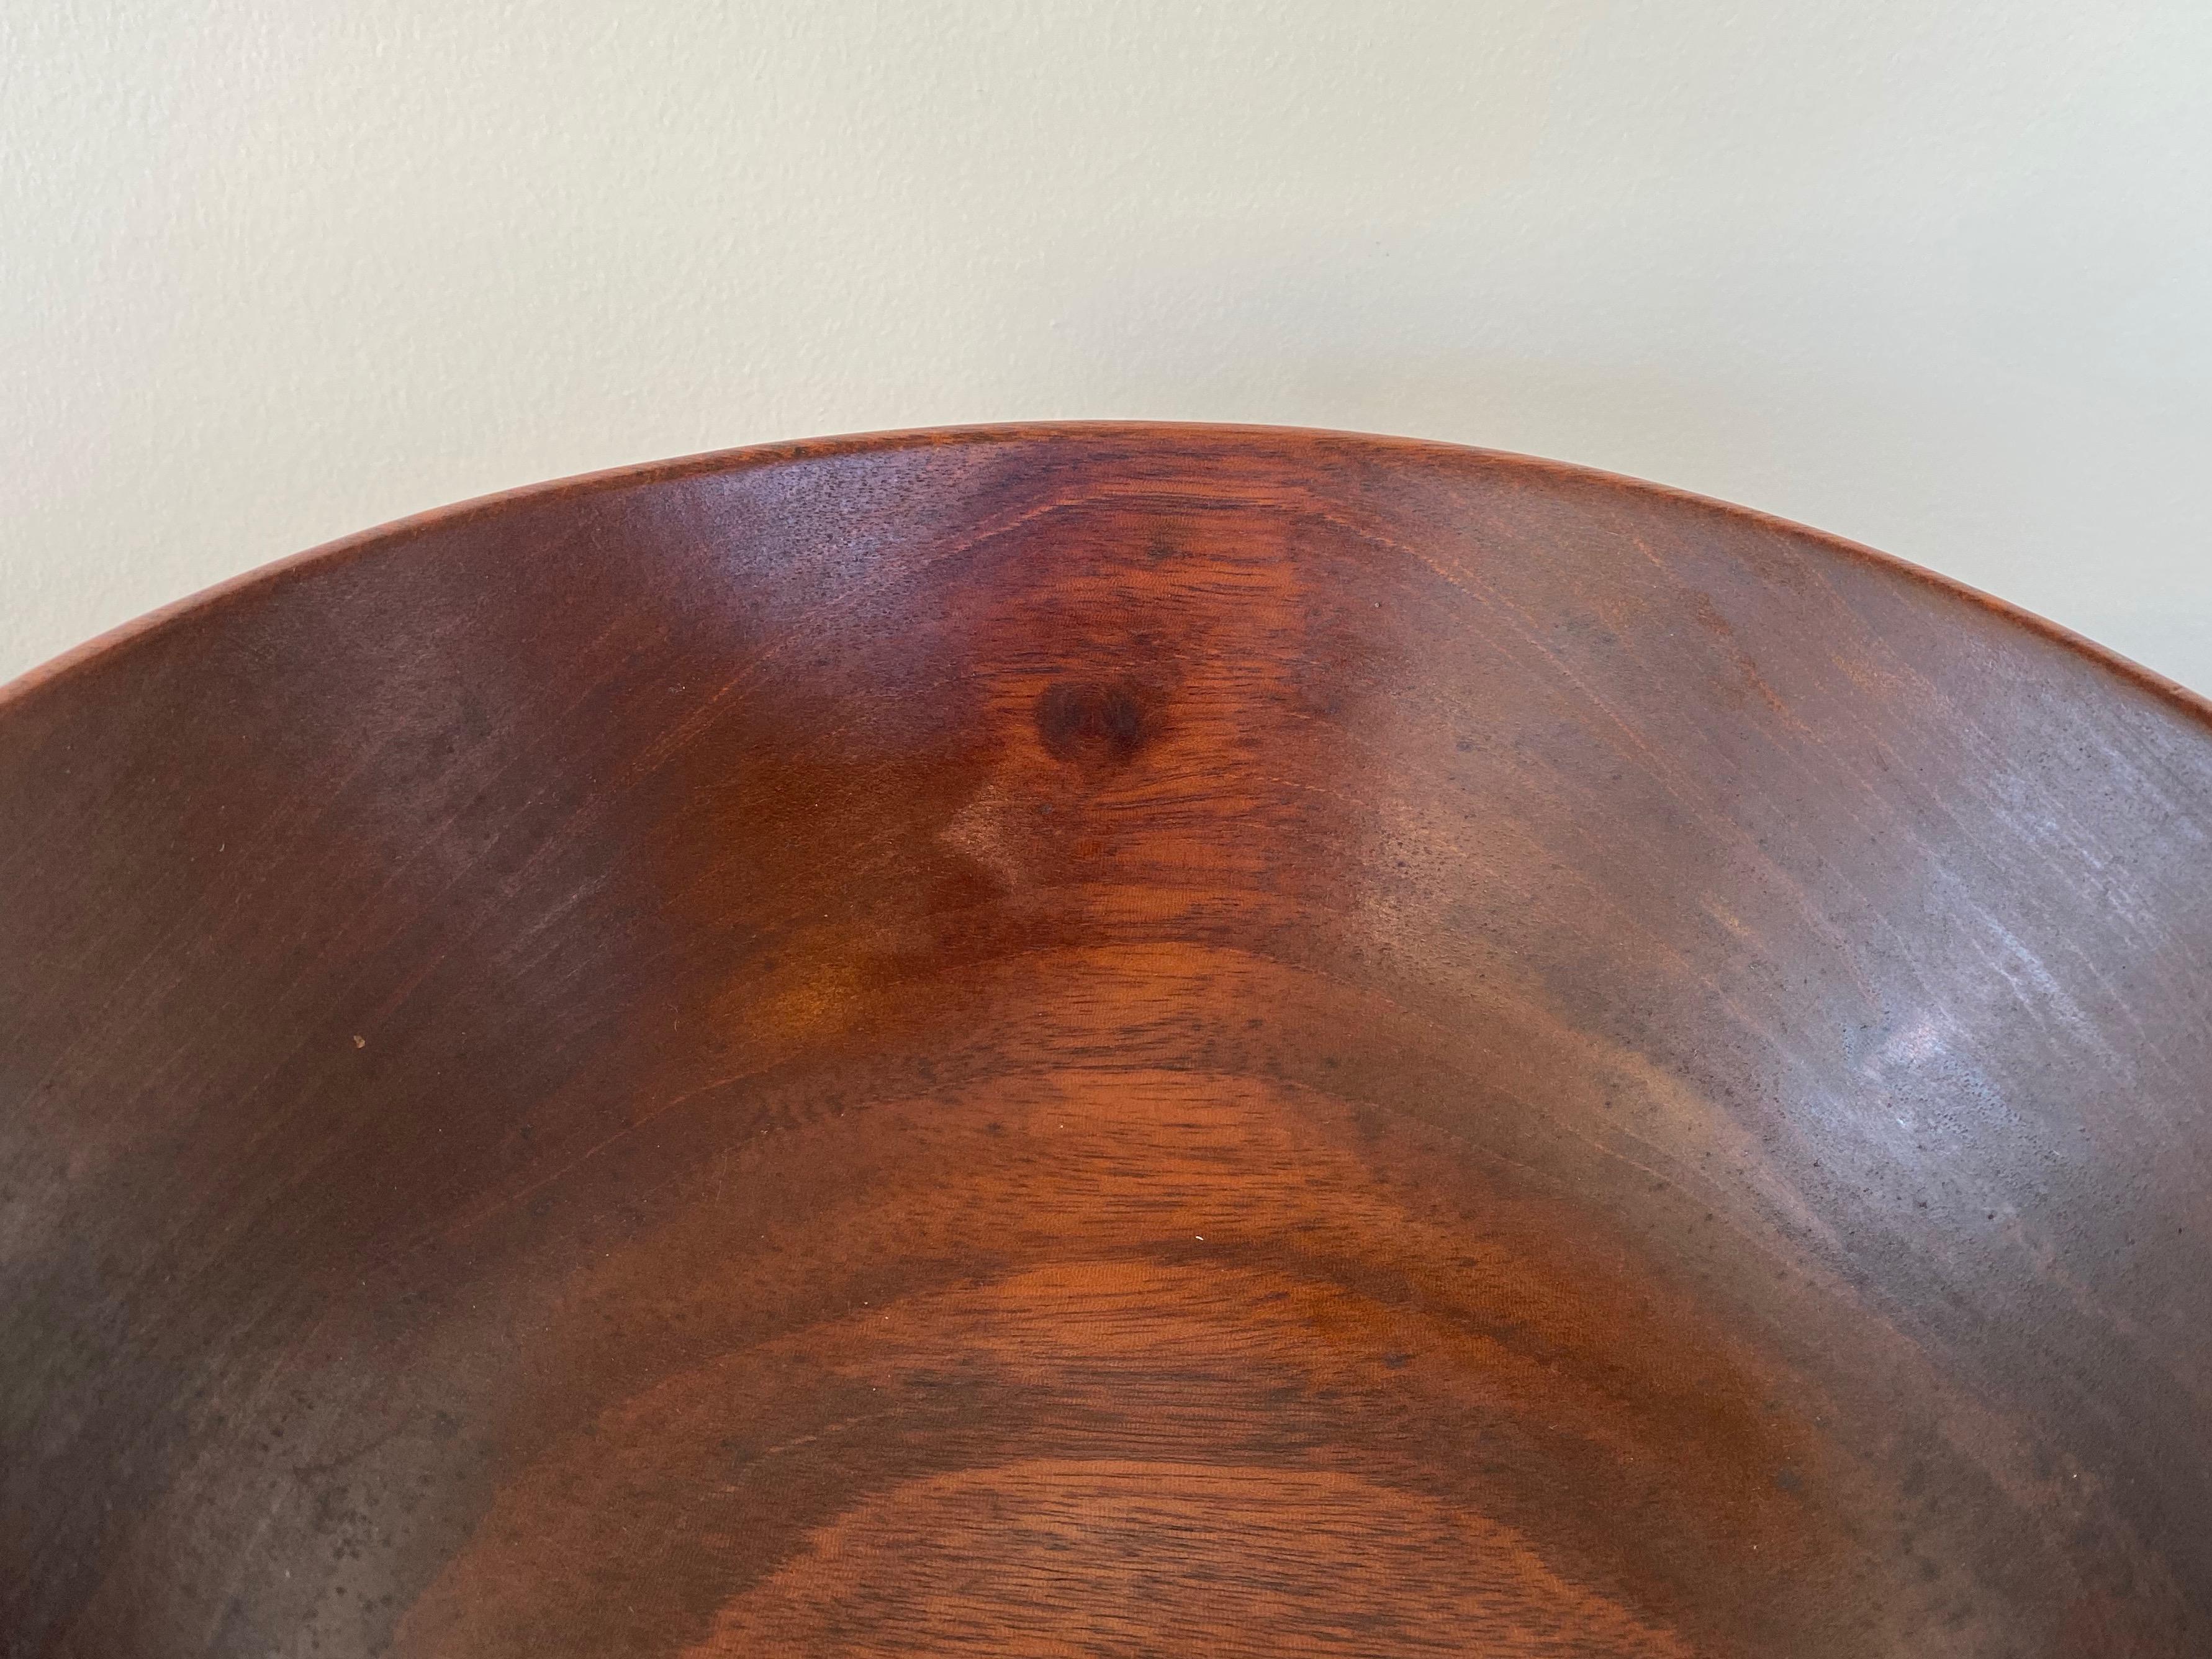 Bob Stocksdale Mahogany Turned Wood Bowl, Signed, 1960s For Sale 5